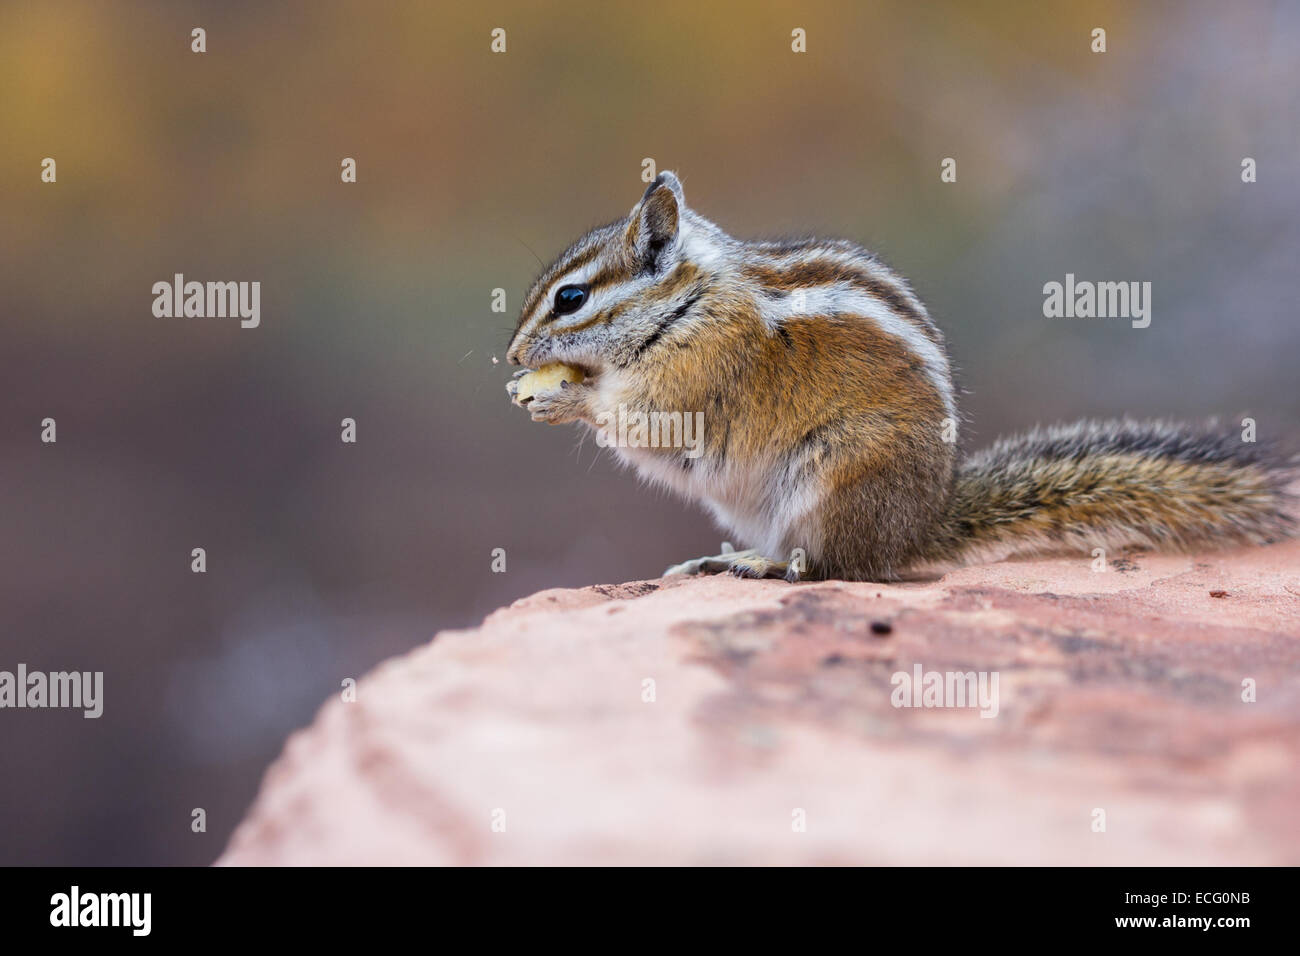 cute small chipmunk standing on a sandstone rock in north america Stock Photo